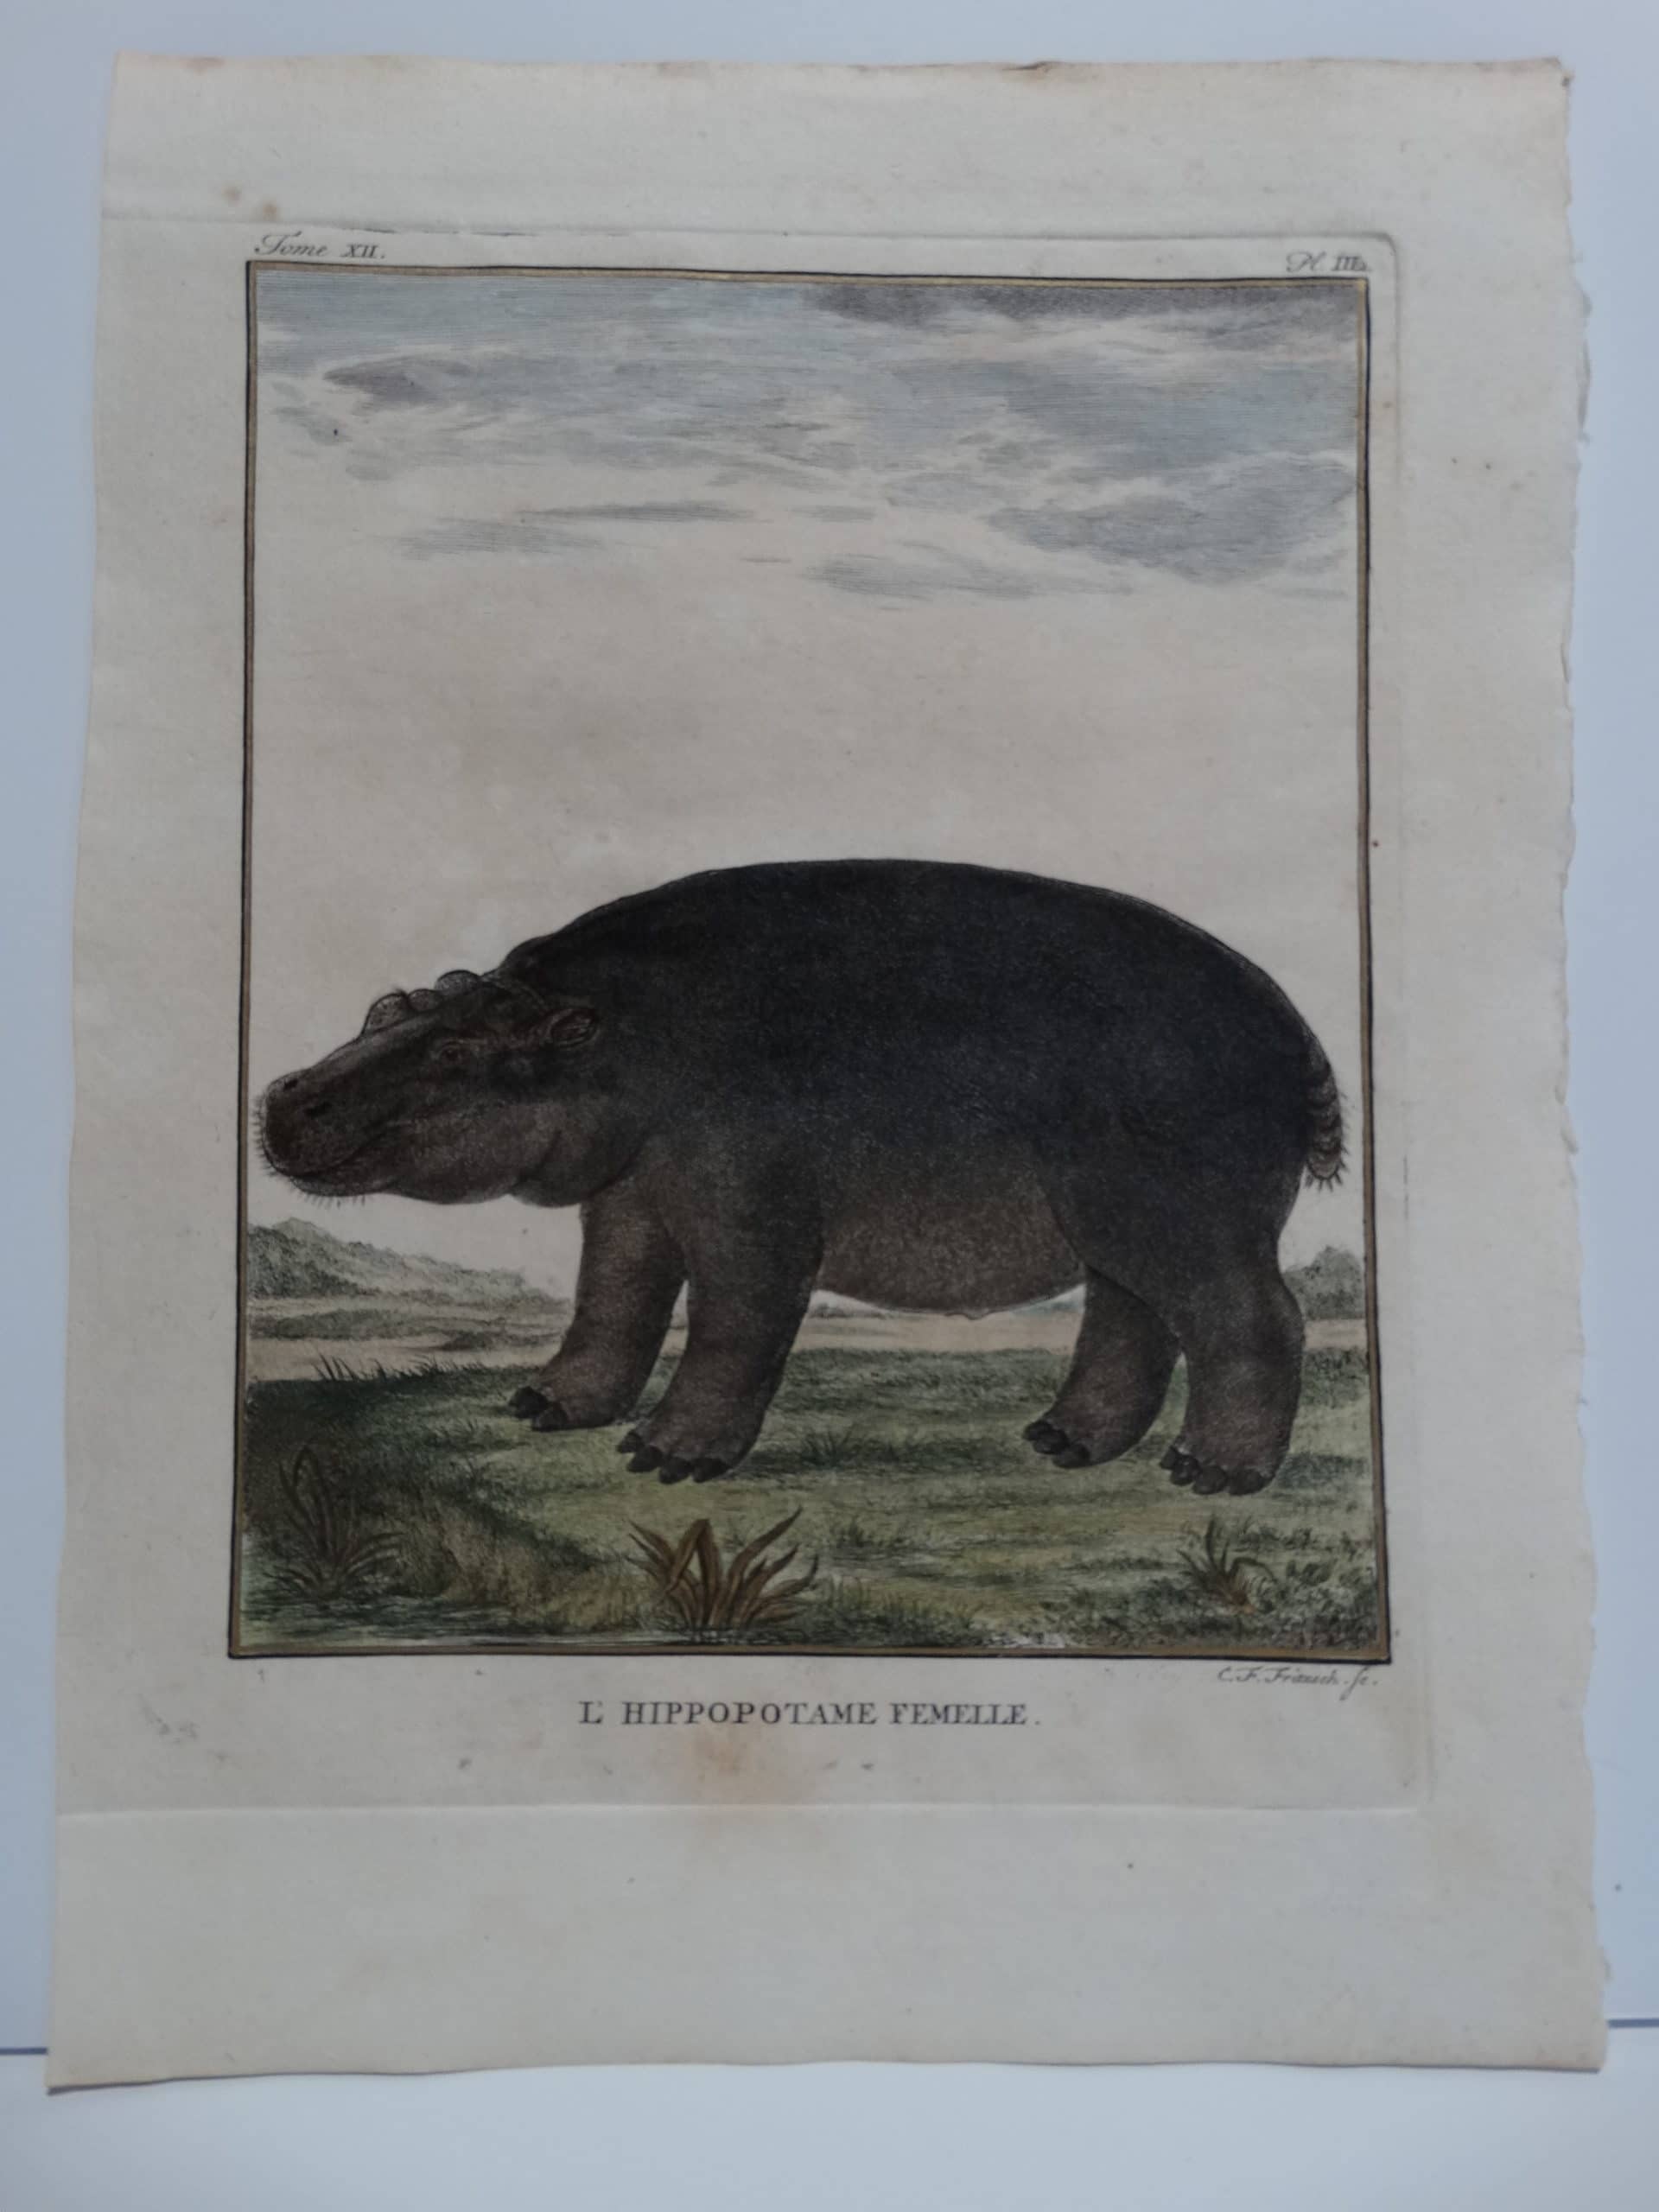 Rare 18th century hand-colored engraving of a hippo or hippopotamus, with expression and attitude.